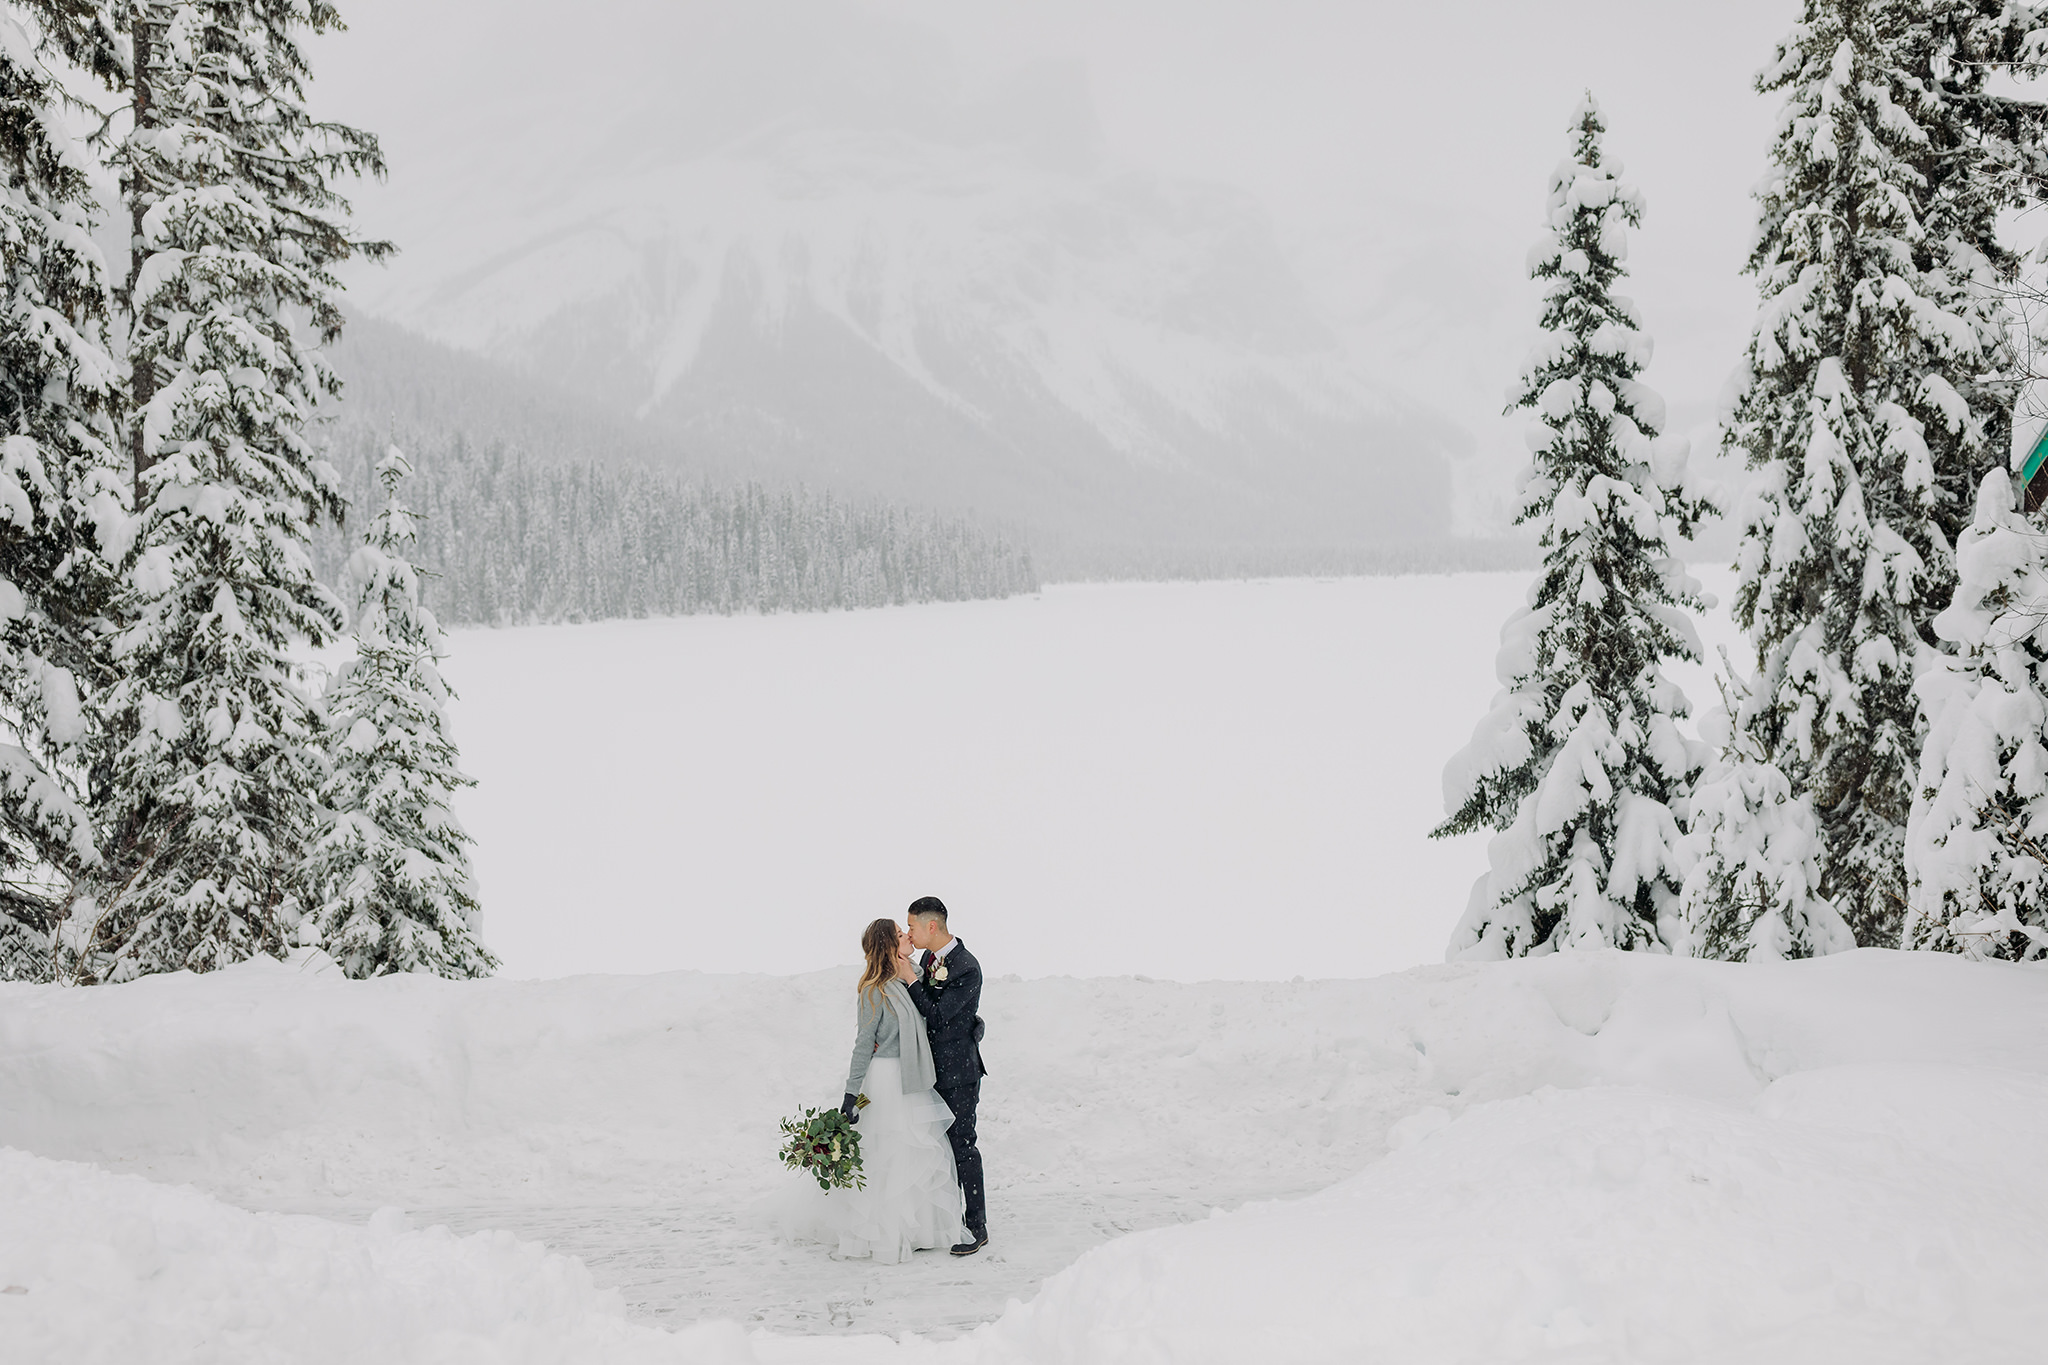 Snowy winter elopement at Emerald Lake Lodge in Yoho National Park. Outdoor winter wedding ceremony at the Viewpoint overlooking mountains & forest.